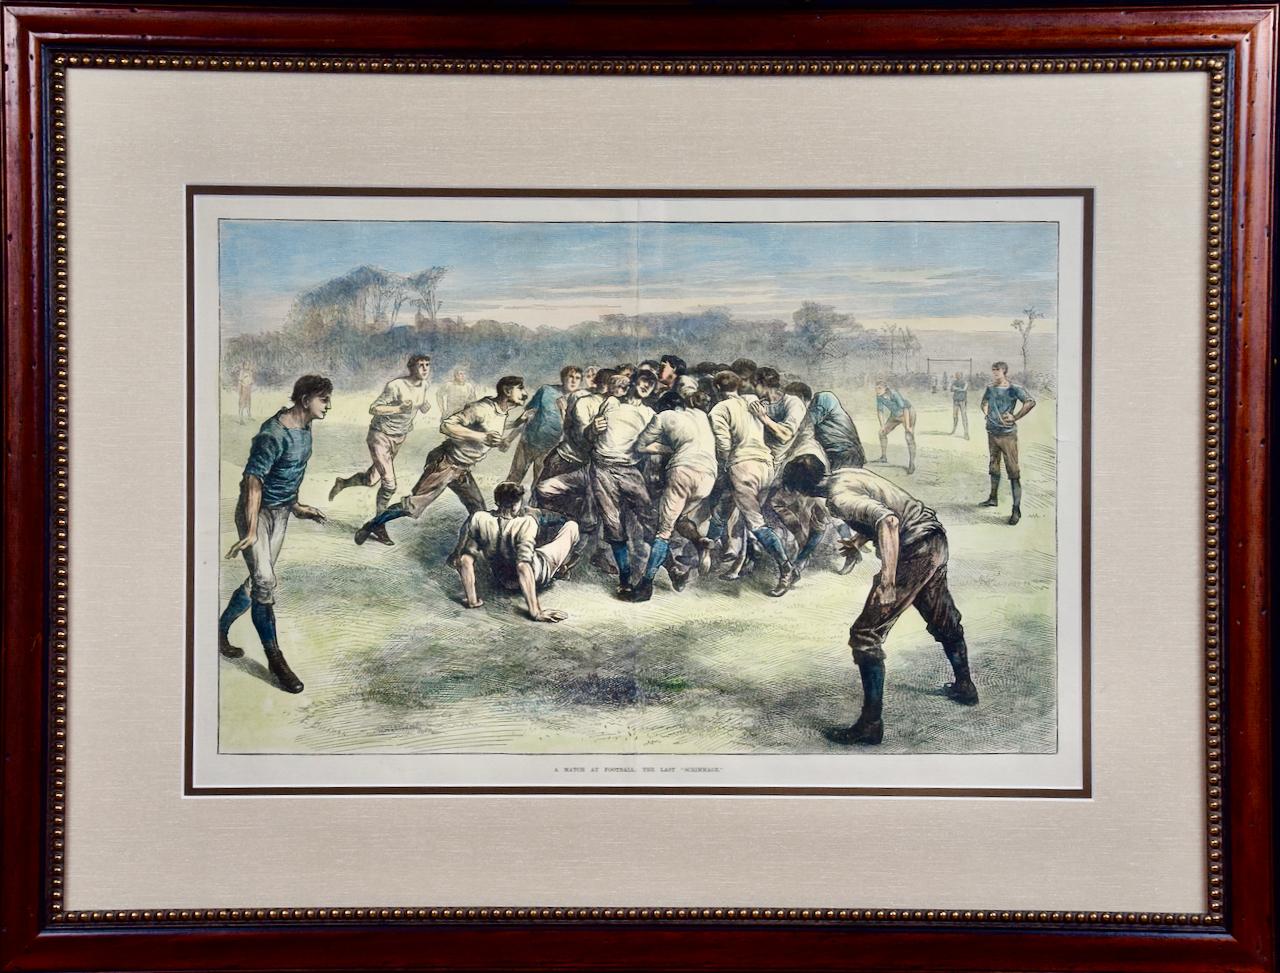 Edwin Buckman Landscape Print - A 19th Century Hand-colored Woodcut Engraving "A Match at Football" (Rugby)